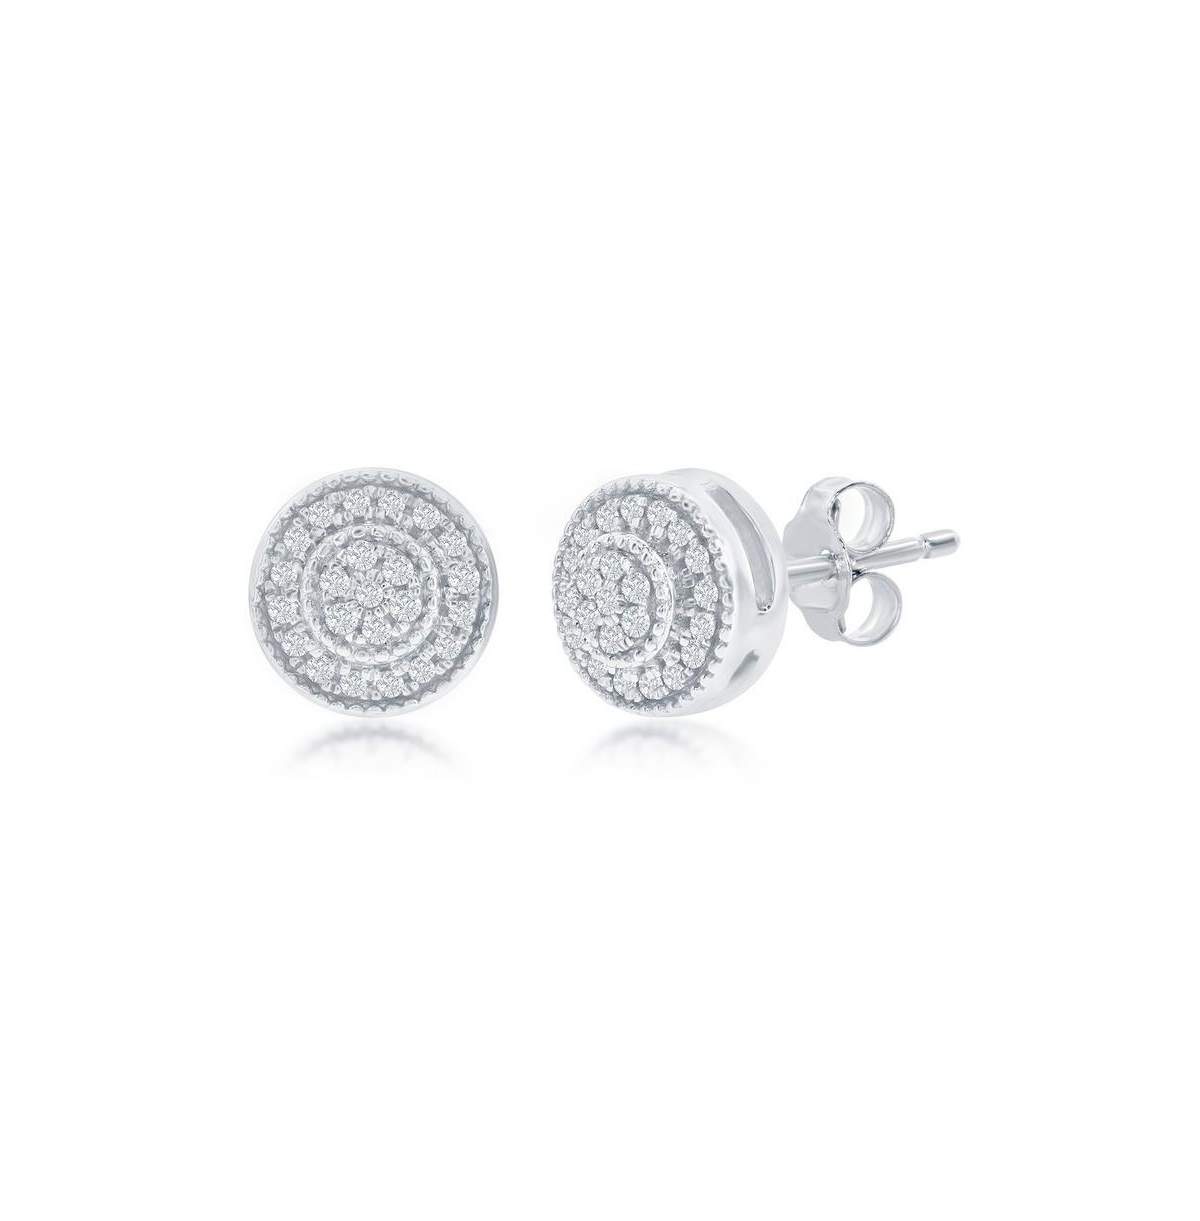 SIMONA ROUND HALO DIAMOND STUD EARRINGS (0.1 CT. T.W.) 46 STONES IN STERLING SILVER